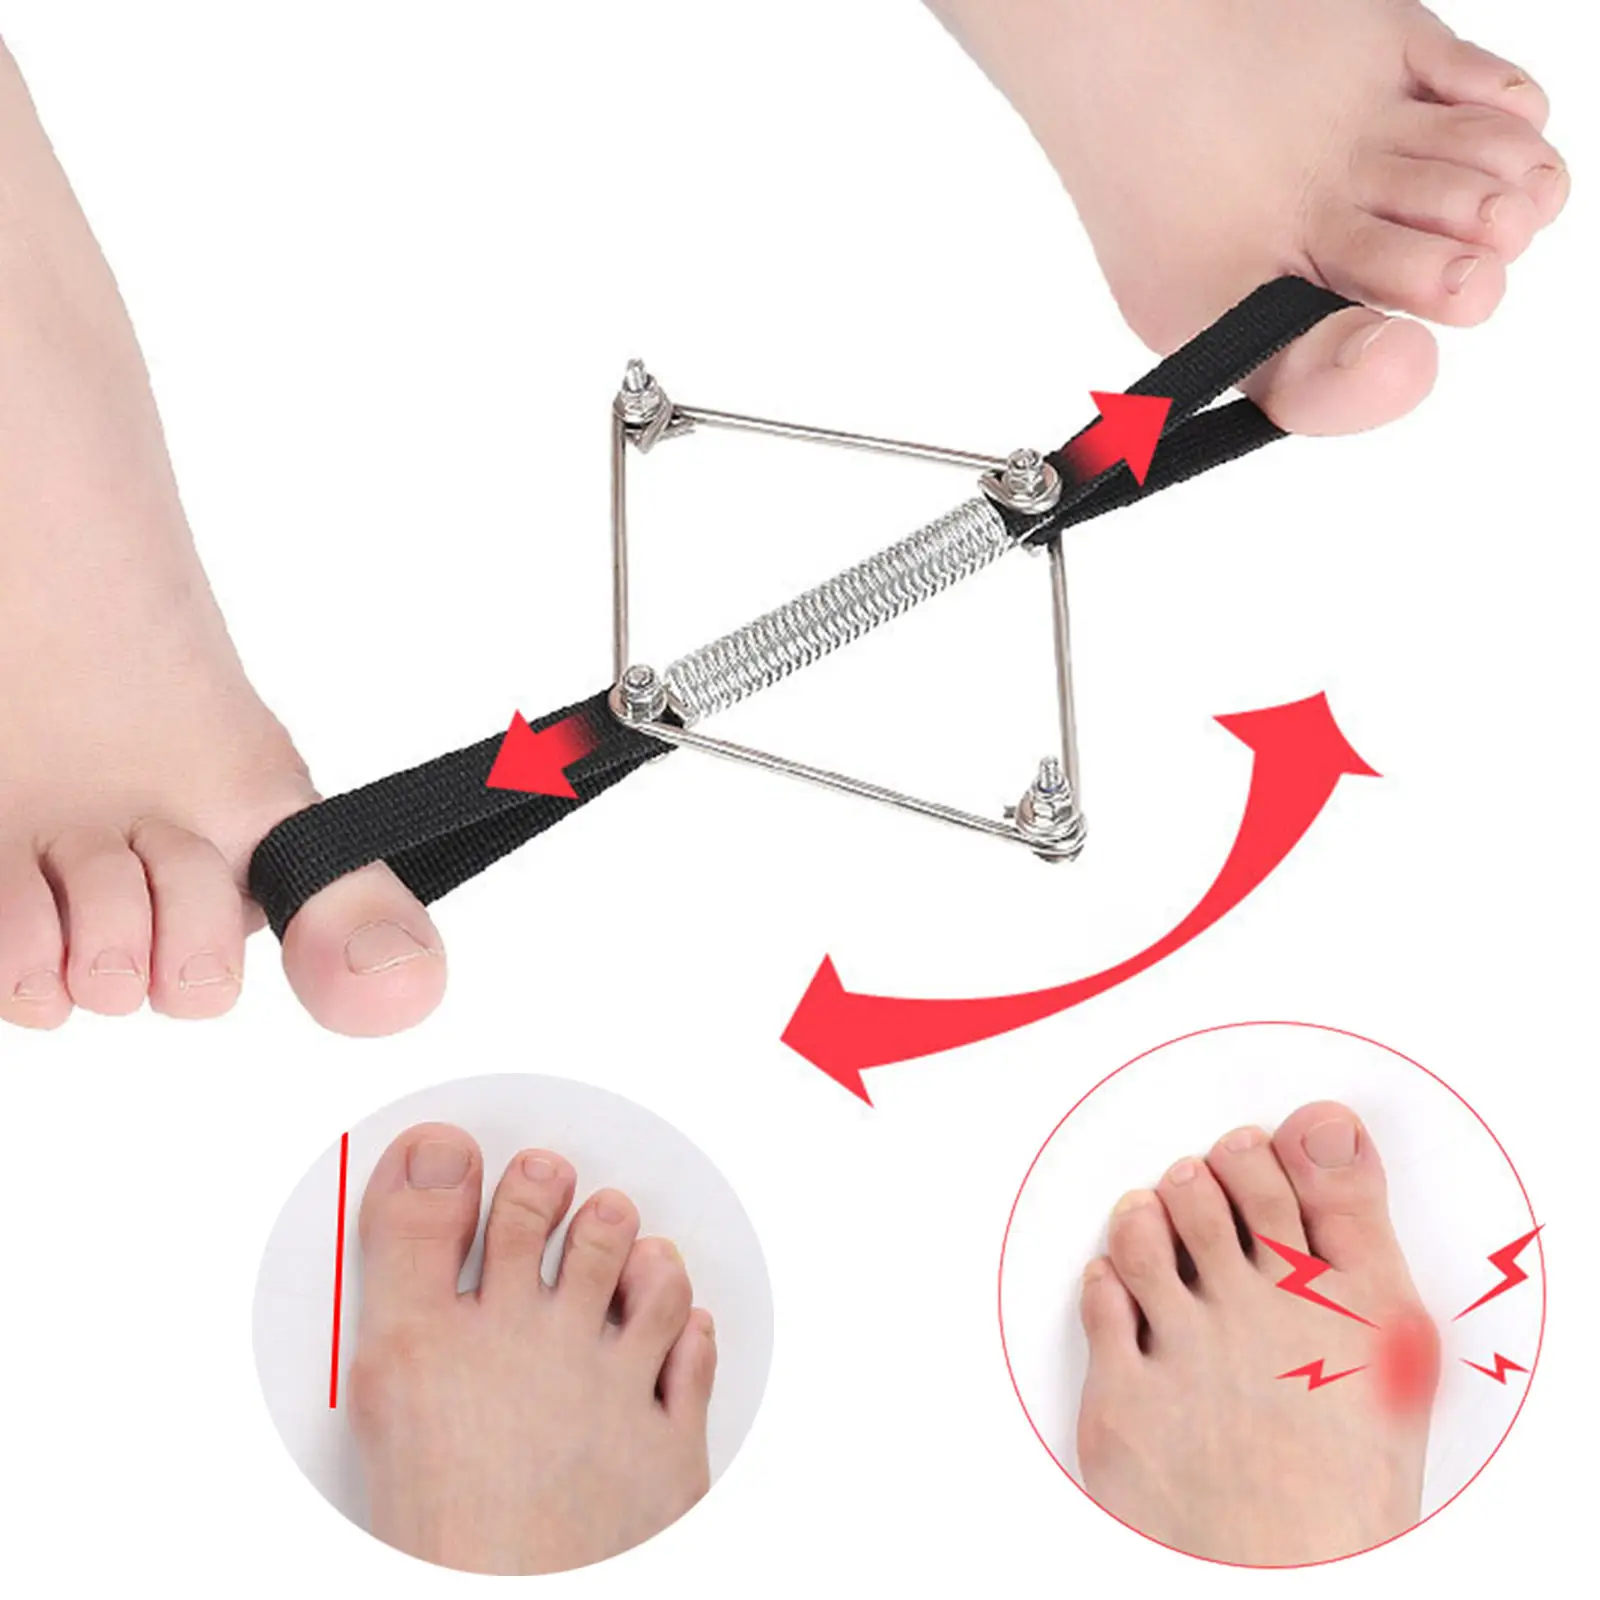 Bunion Corrector Elastic Toe Straightener Toe Exerciser for Hammer Toes Big Toe Joint Fitness Use Foot Care Correct Your Toes